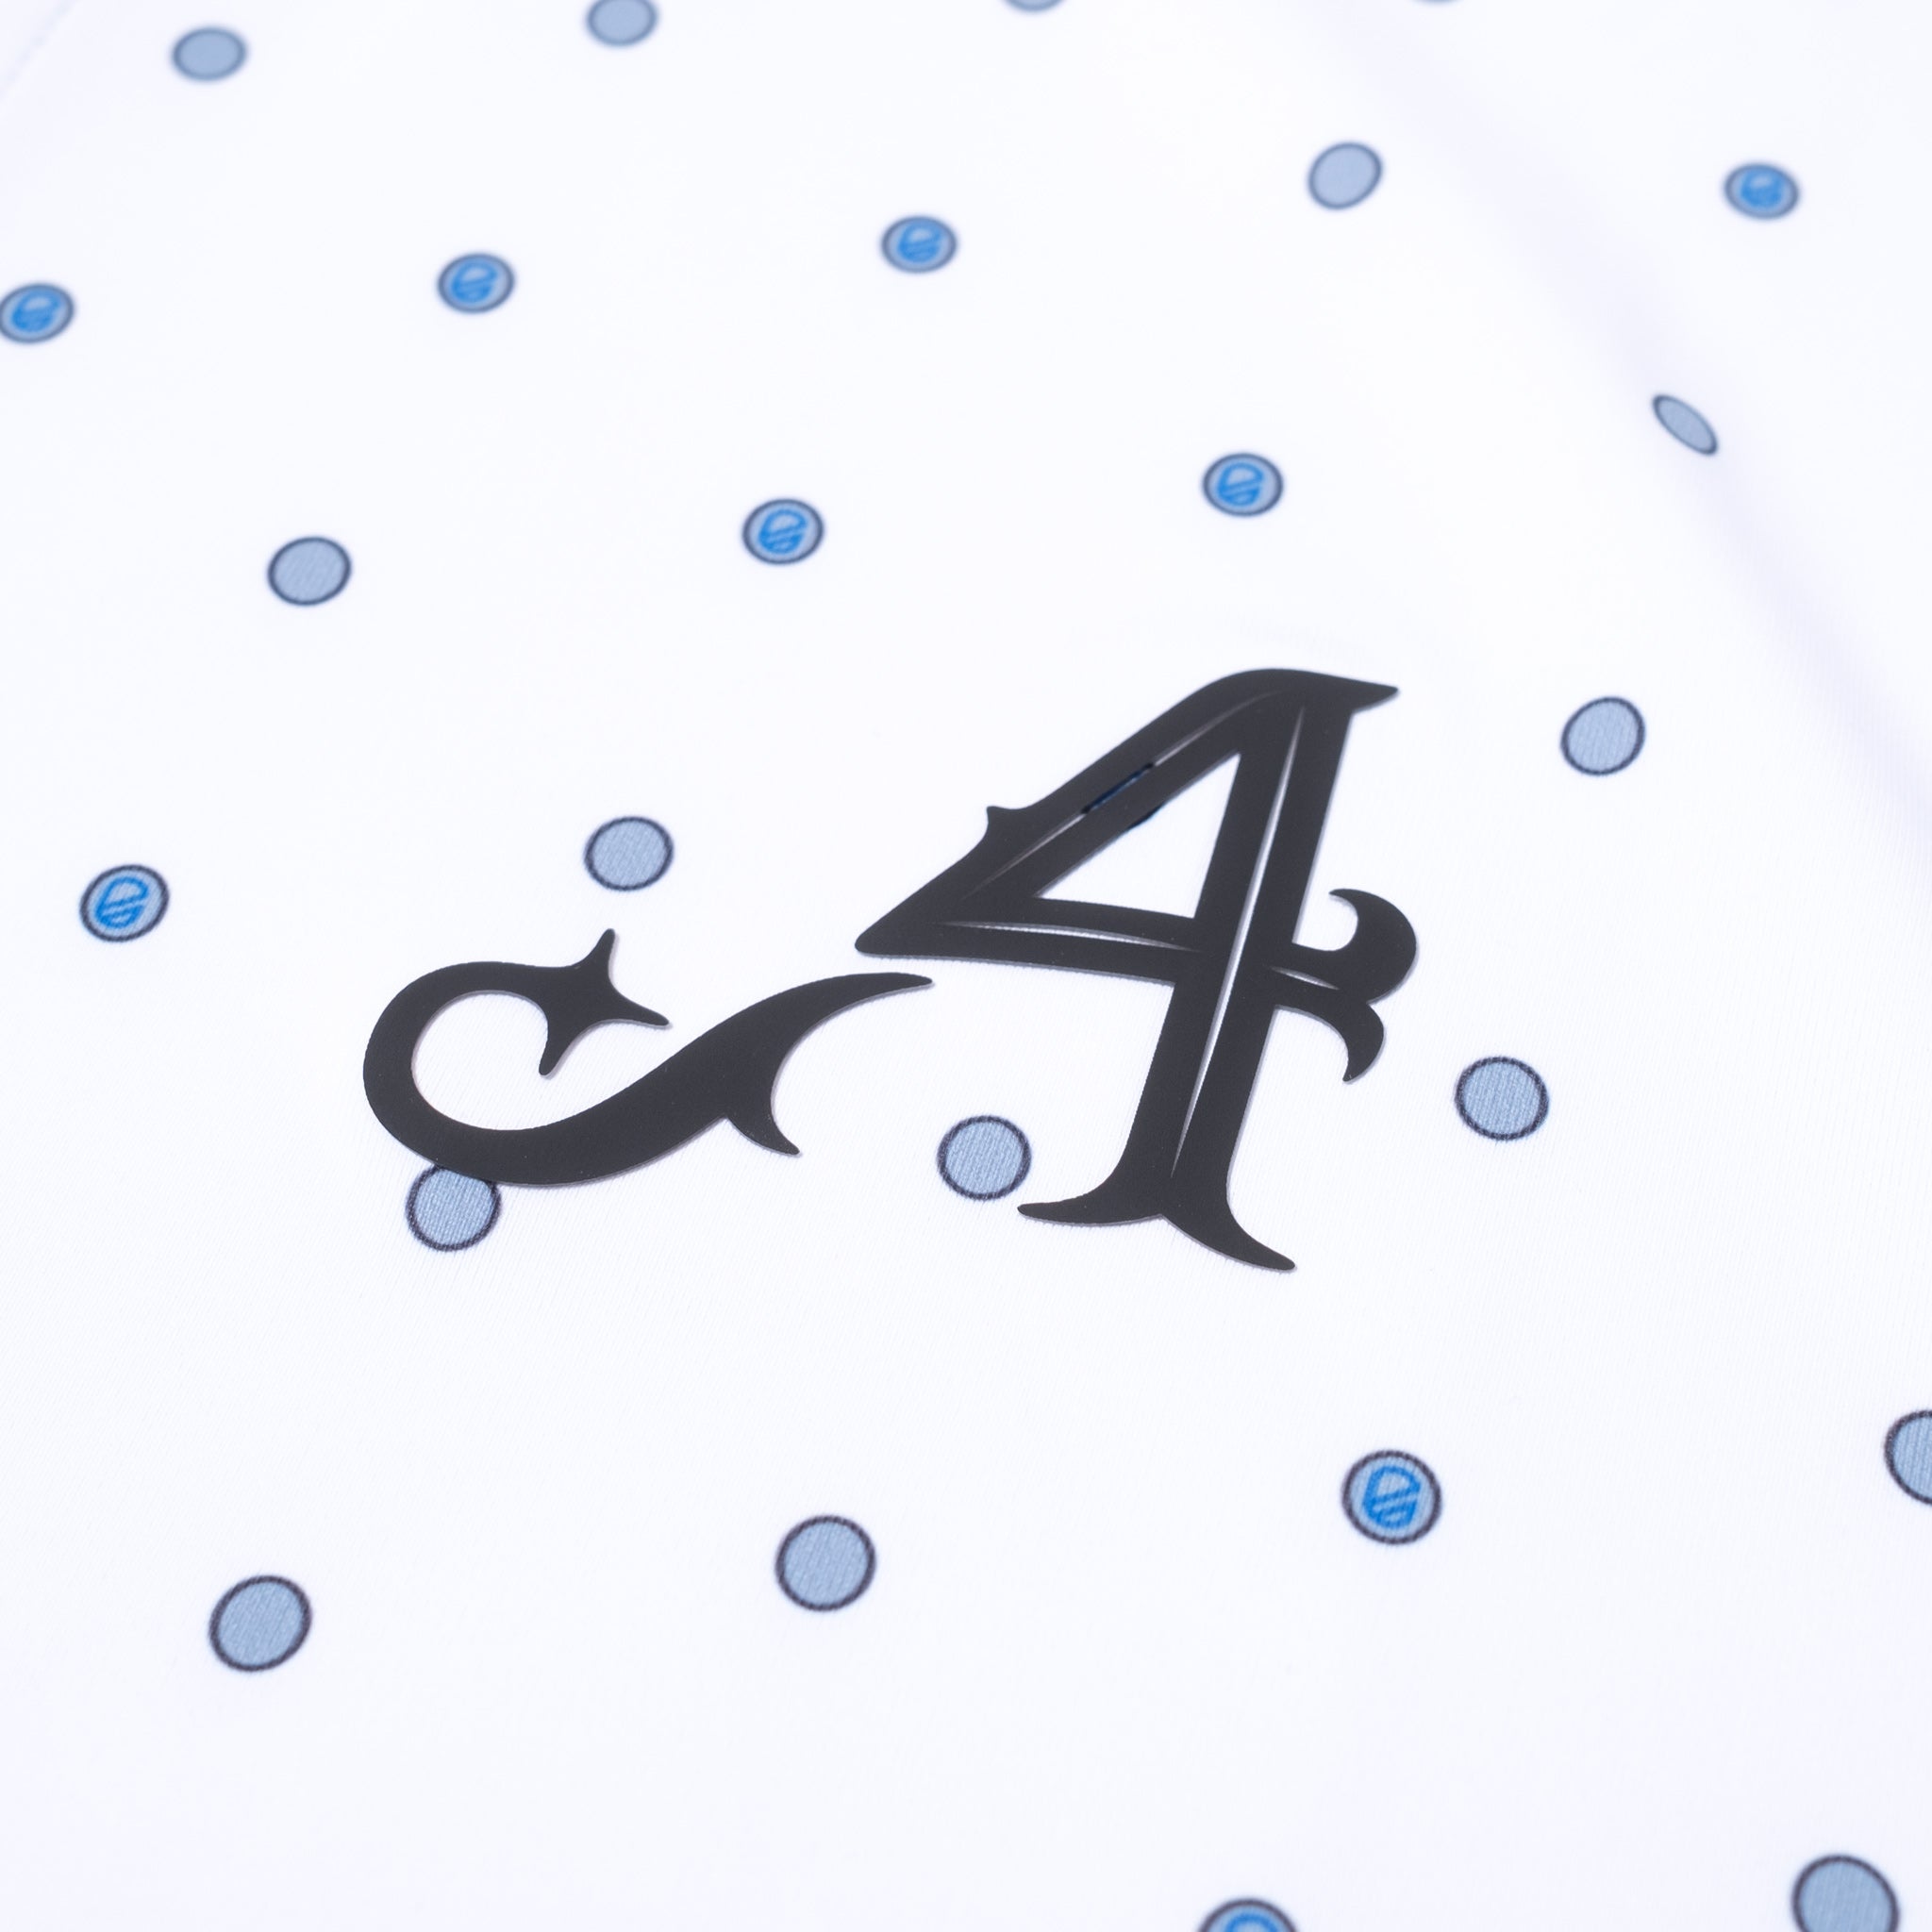 4ACES GC SPOTTED POLO | BRIGHT WHITE DOT